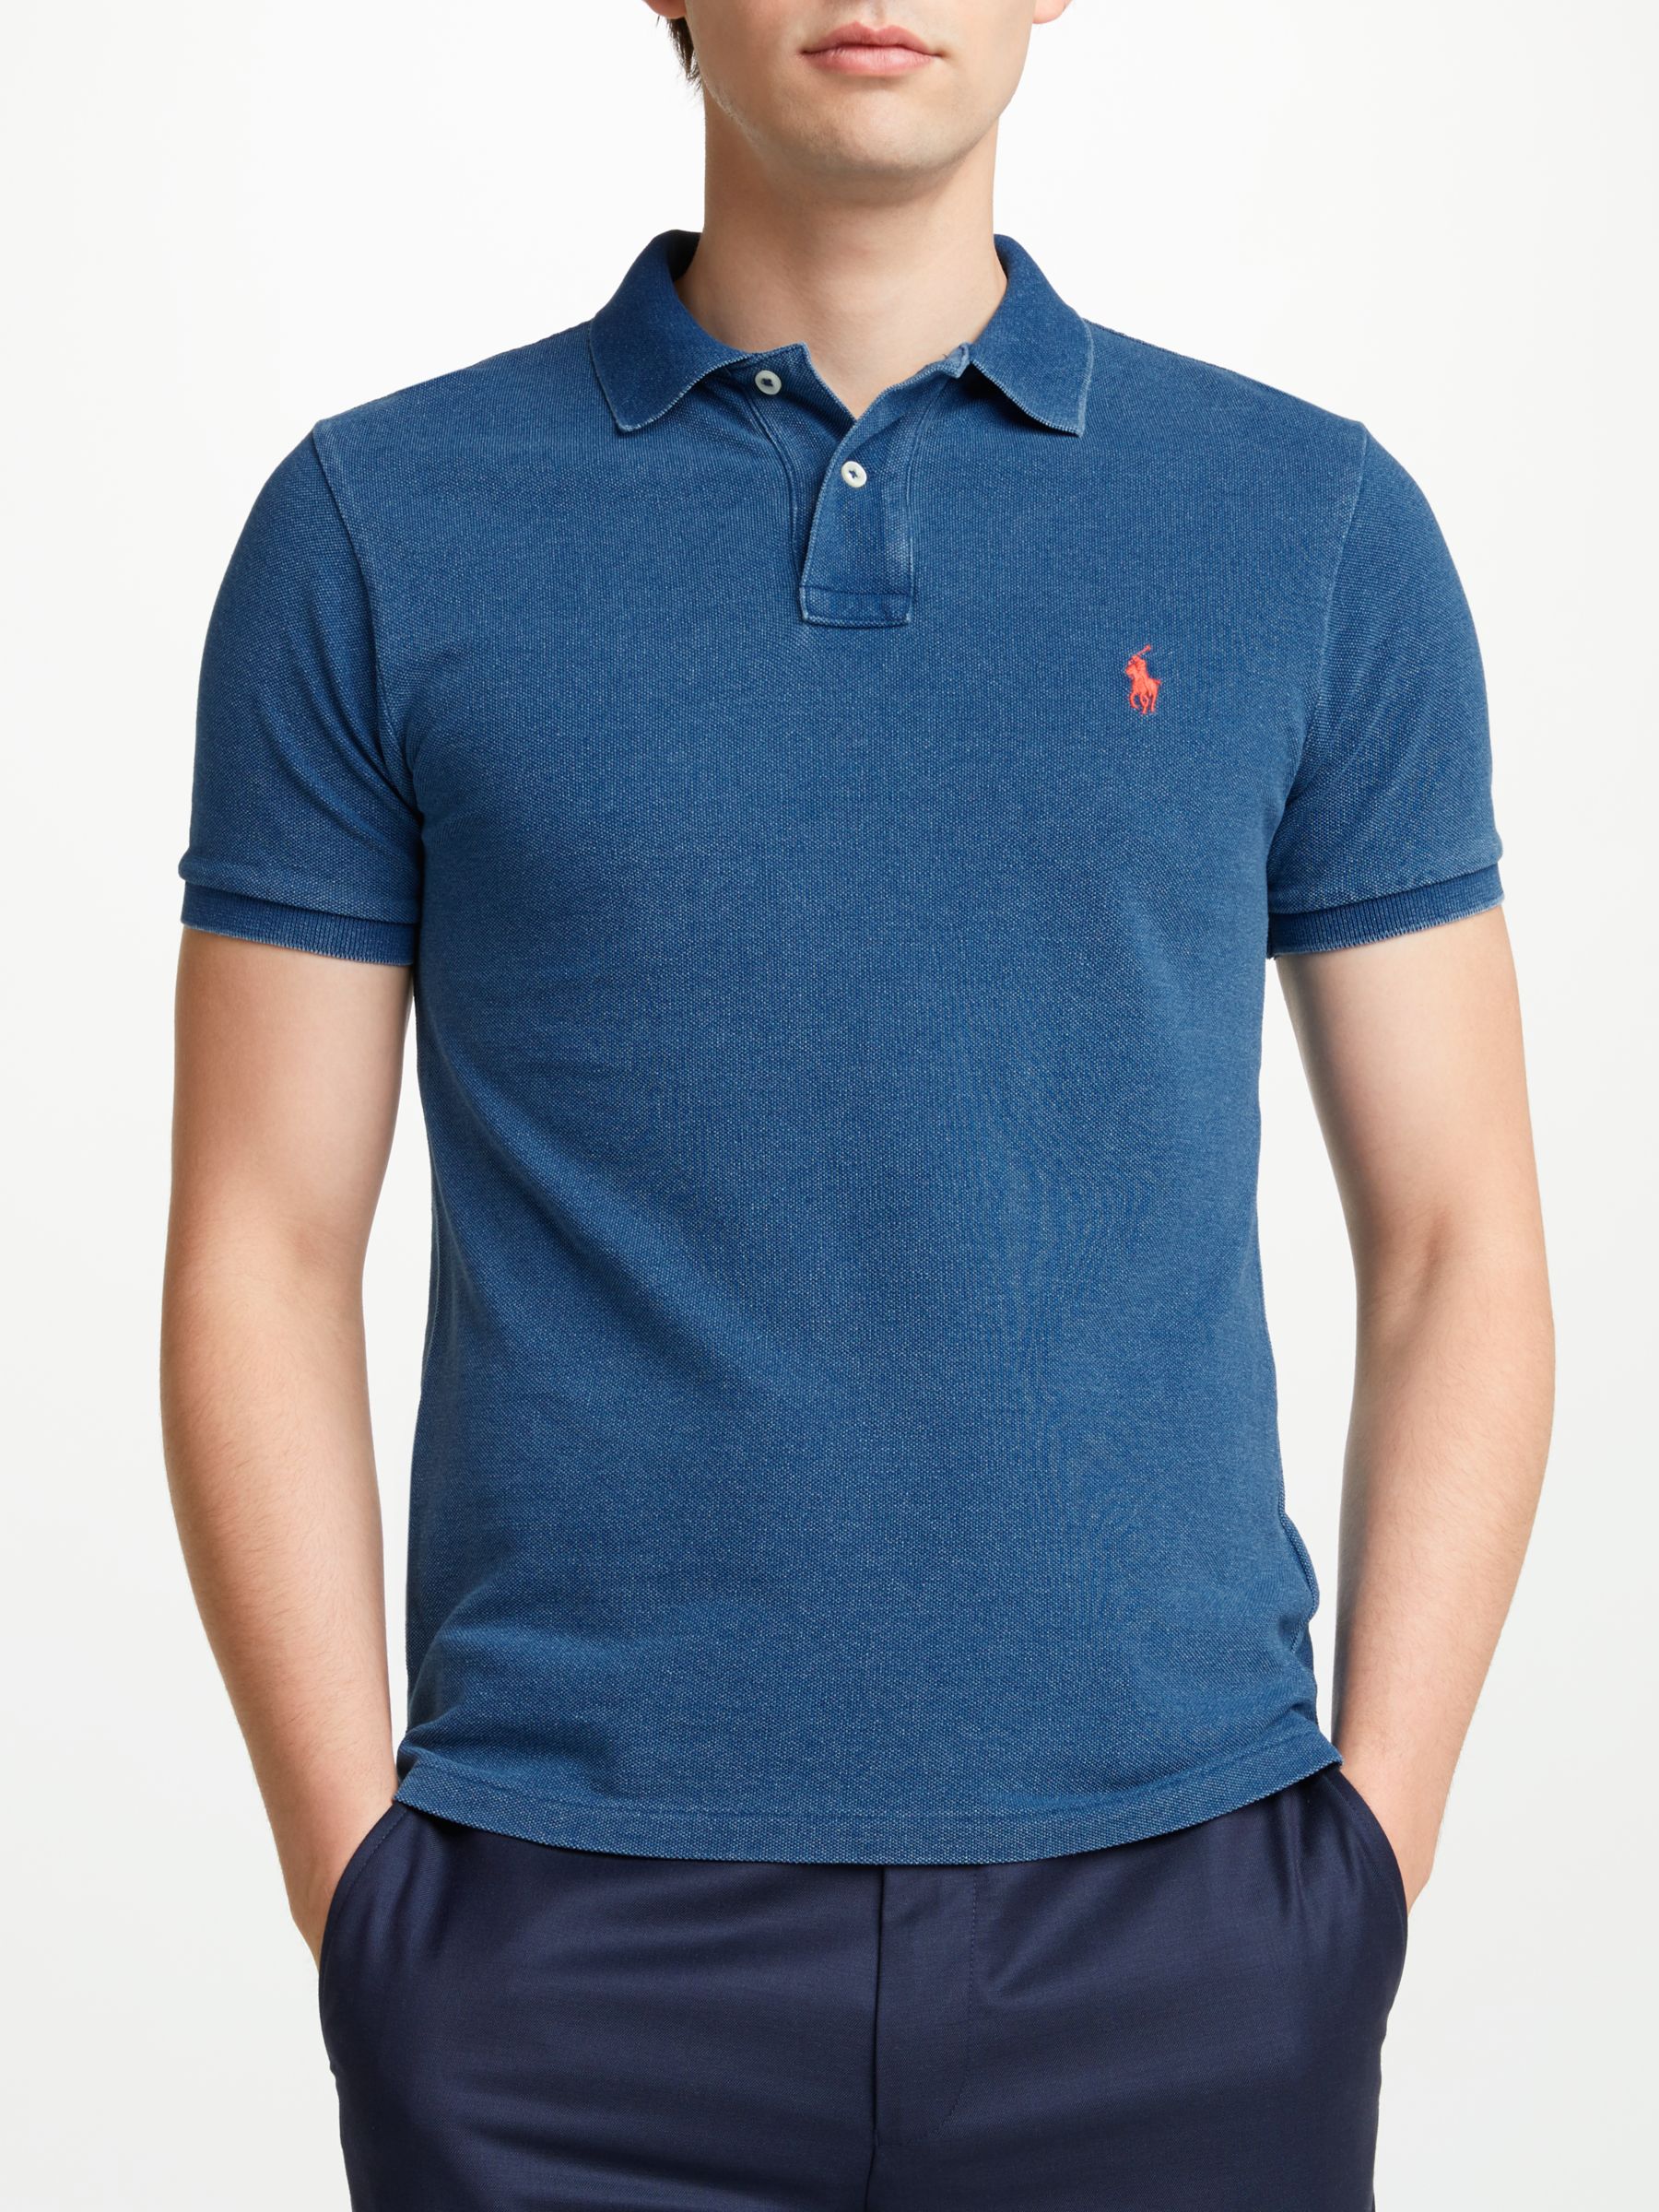 Polo Ralph Lauren Slim Fit Weathered 